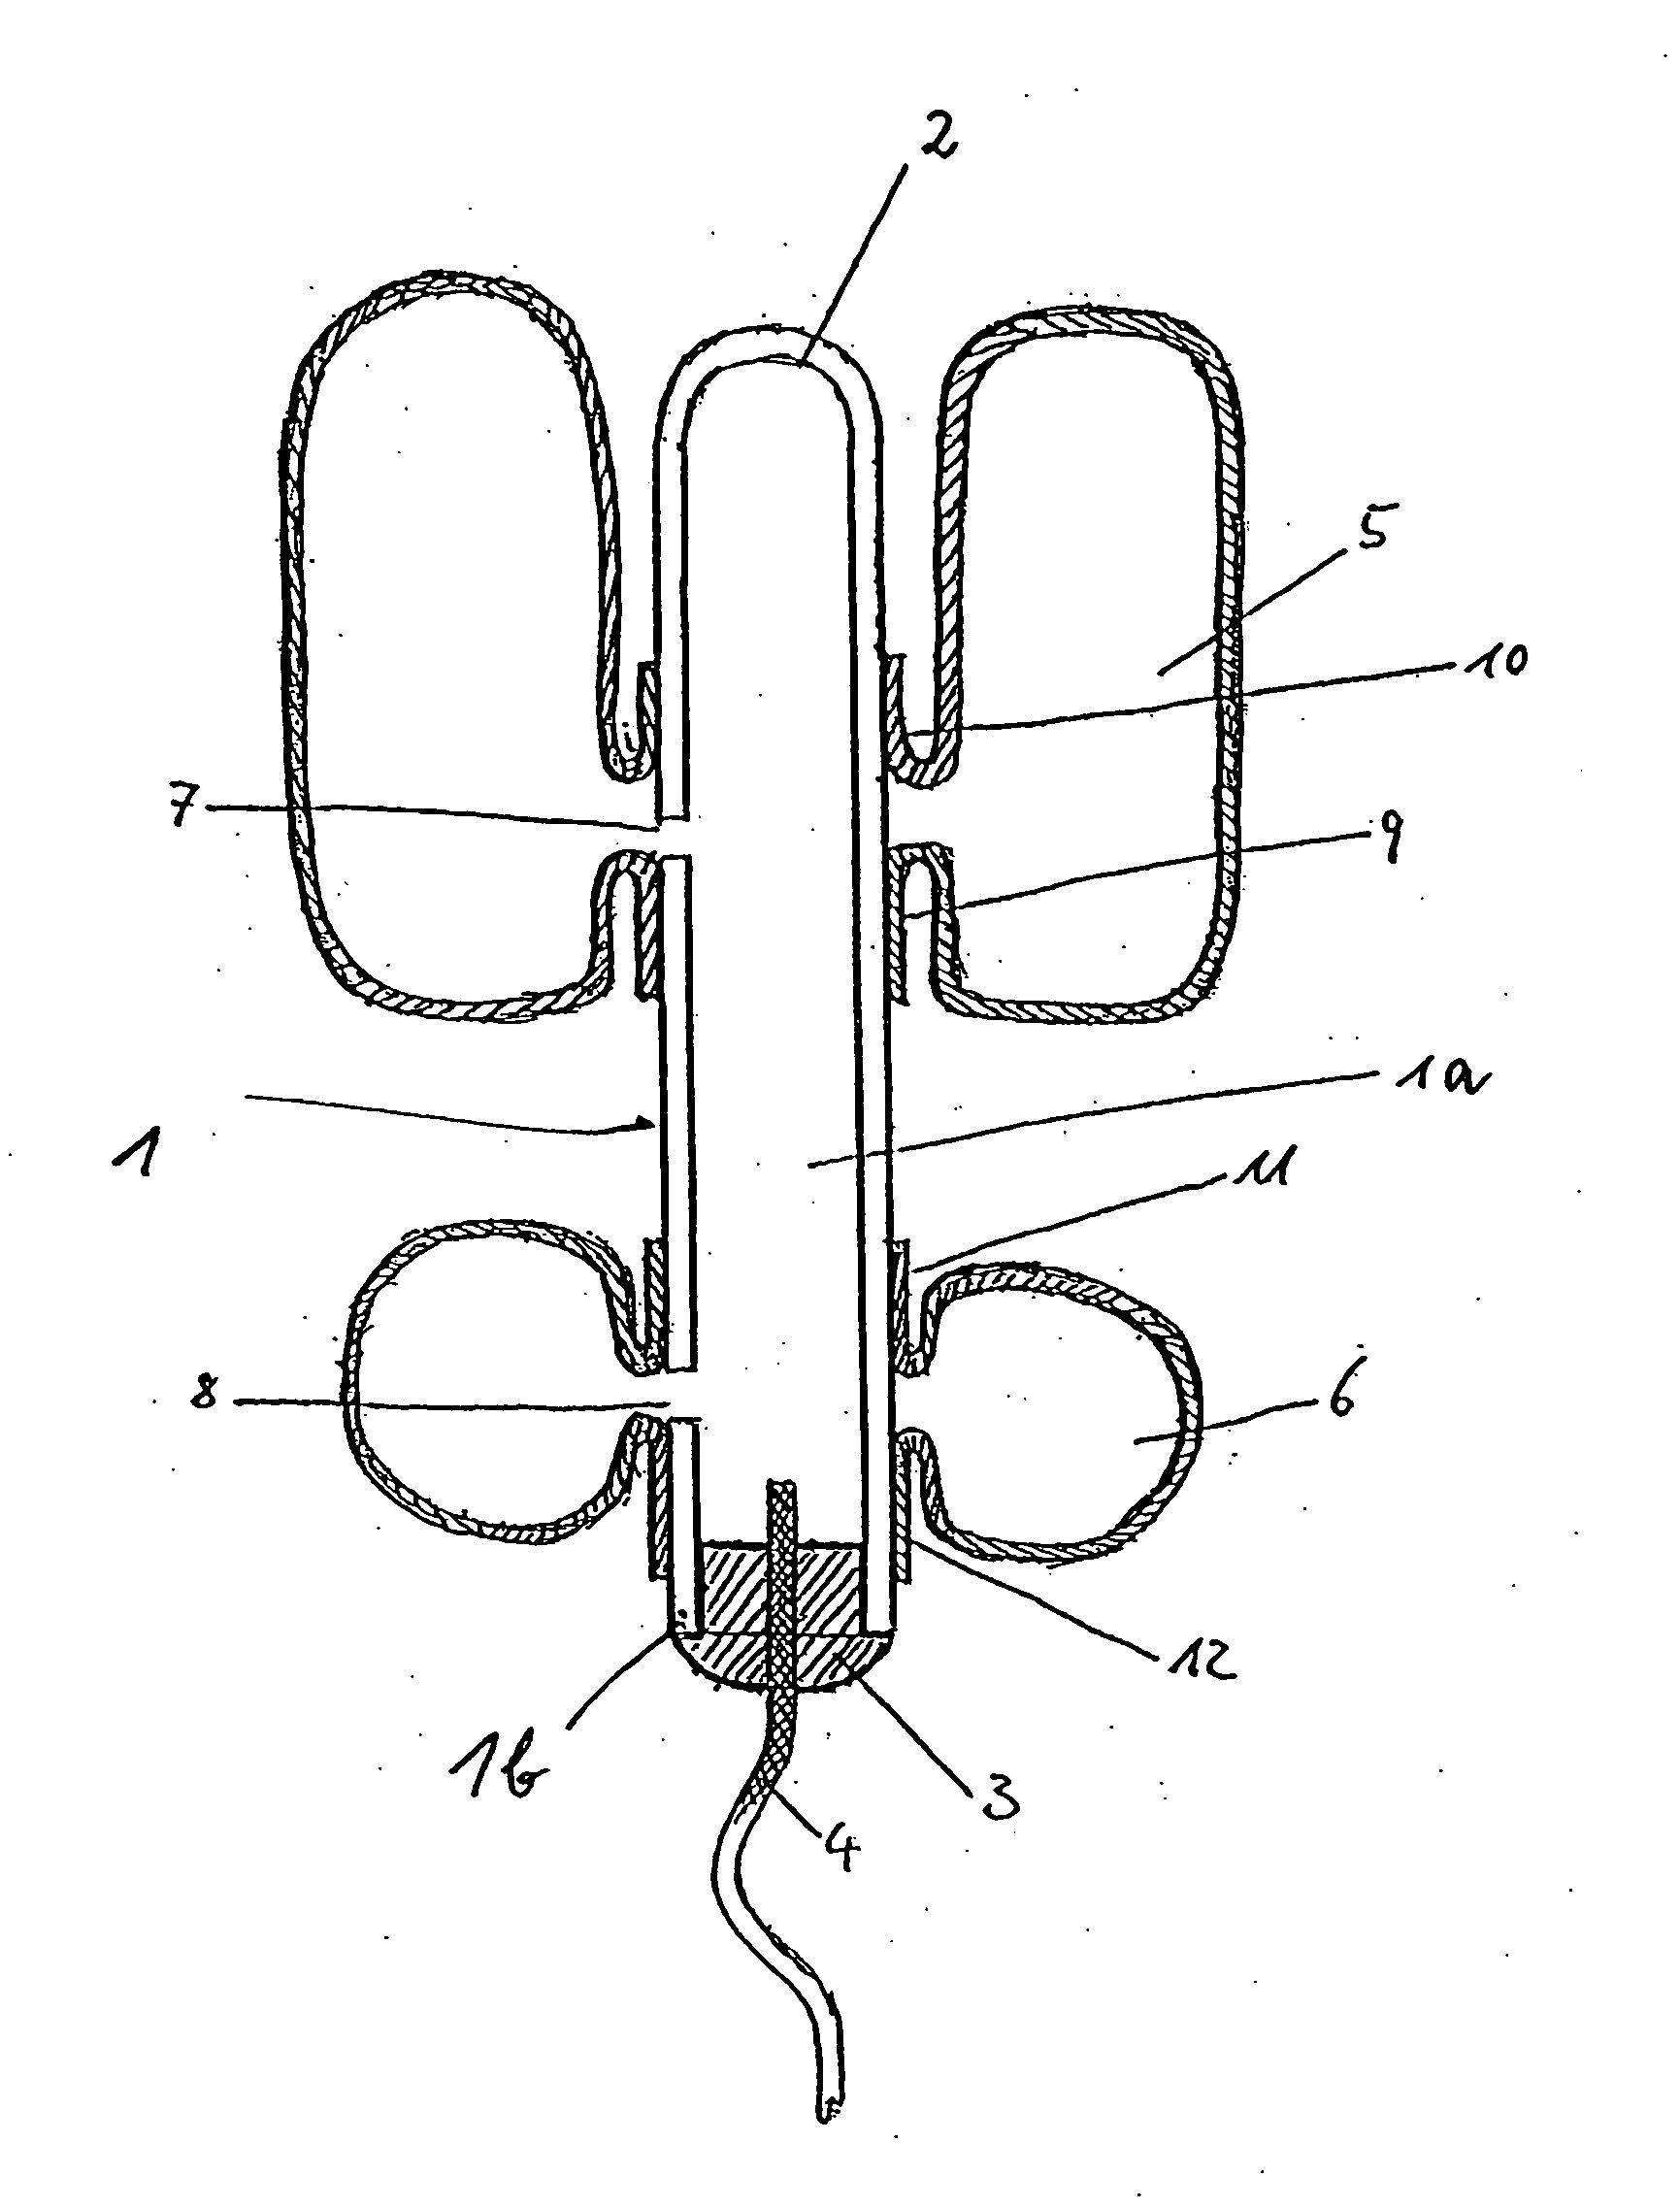 Closure system for managing rectal or anal incontinence